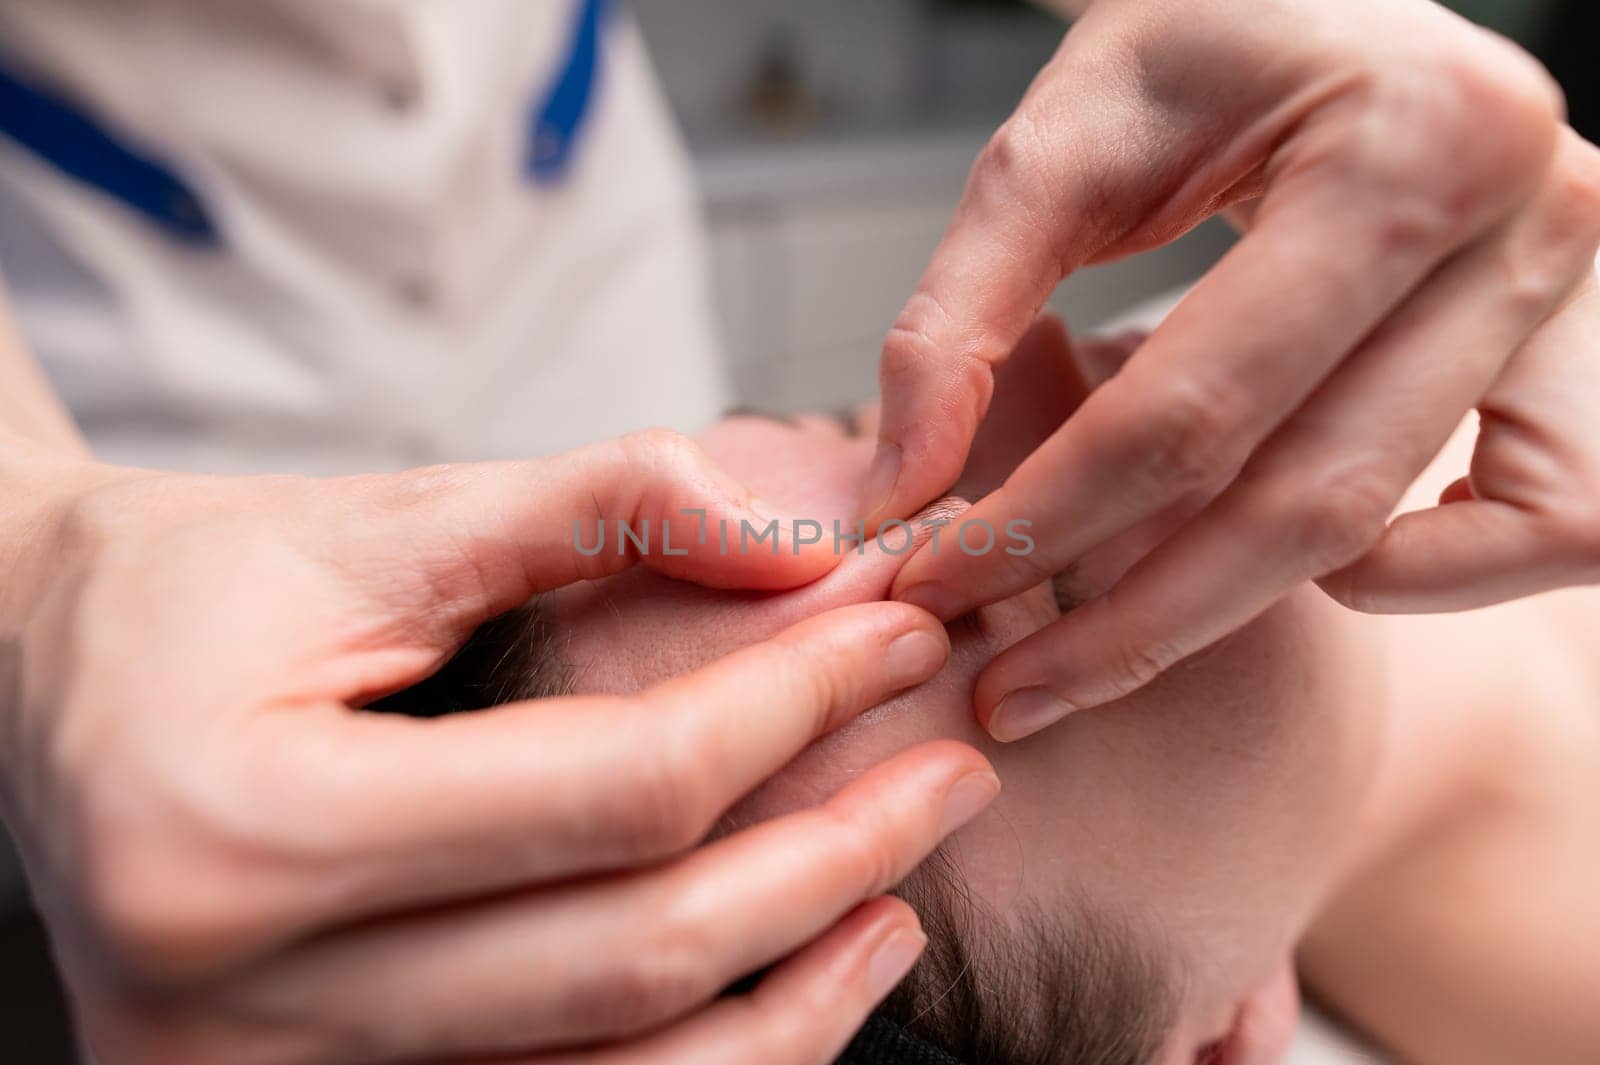 Close-up shot of a woman's head doing a facial massage on a treatment table. Therapist applying pressure with thumbs on forehead by yanik88